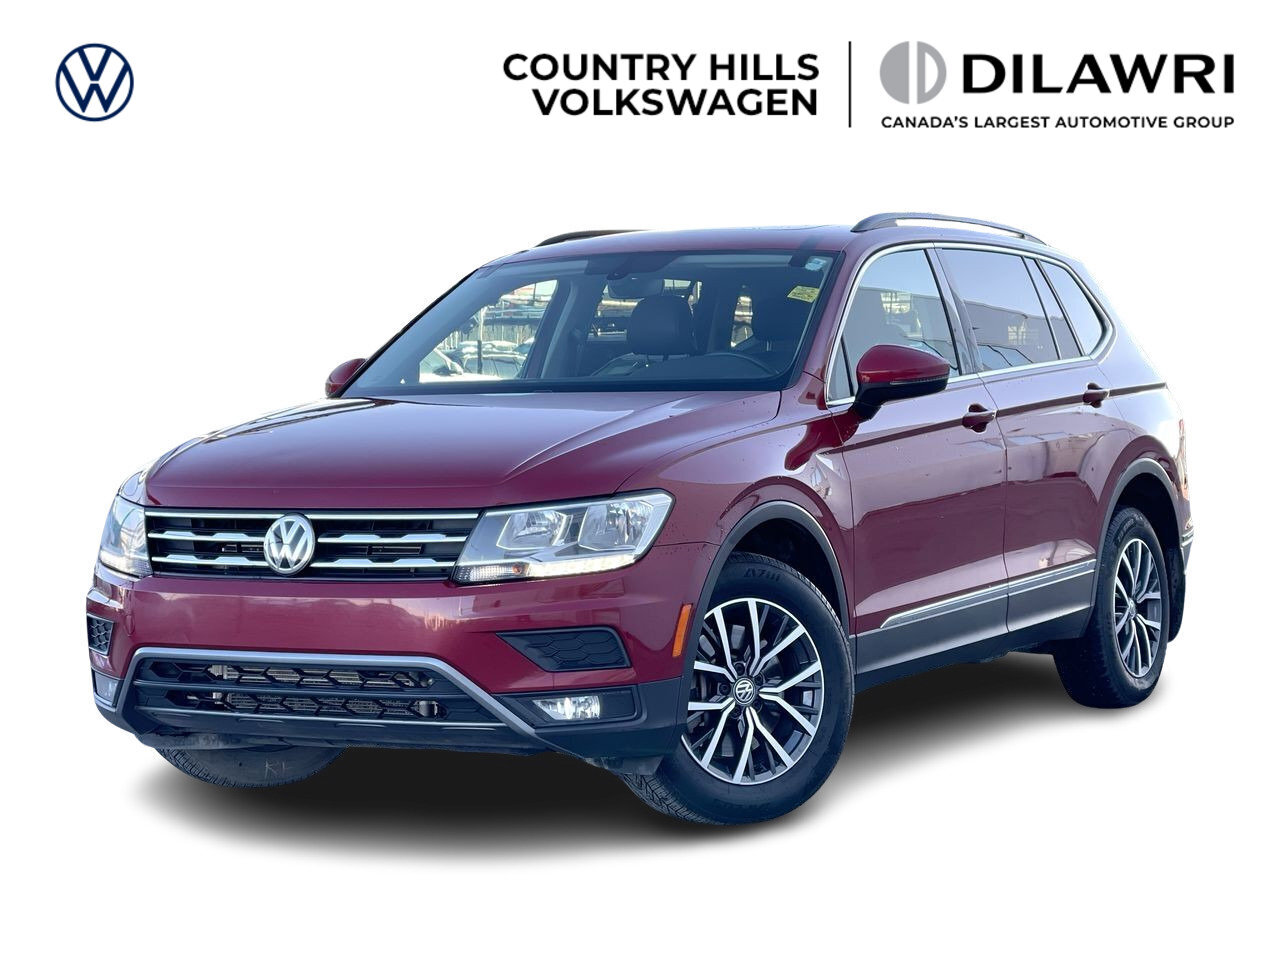 2019 Volkswagen Tiguan Comfortline AWD 2.0L TSI LOW KMS Locally Owned/One